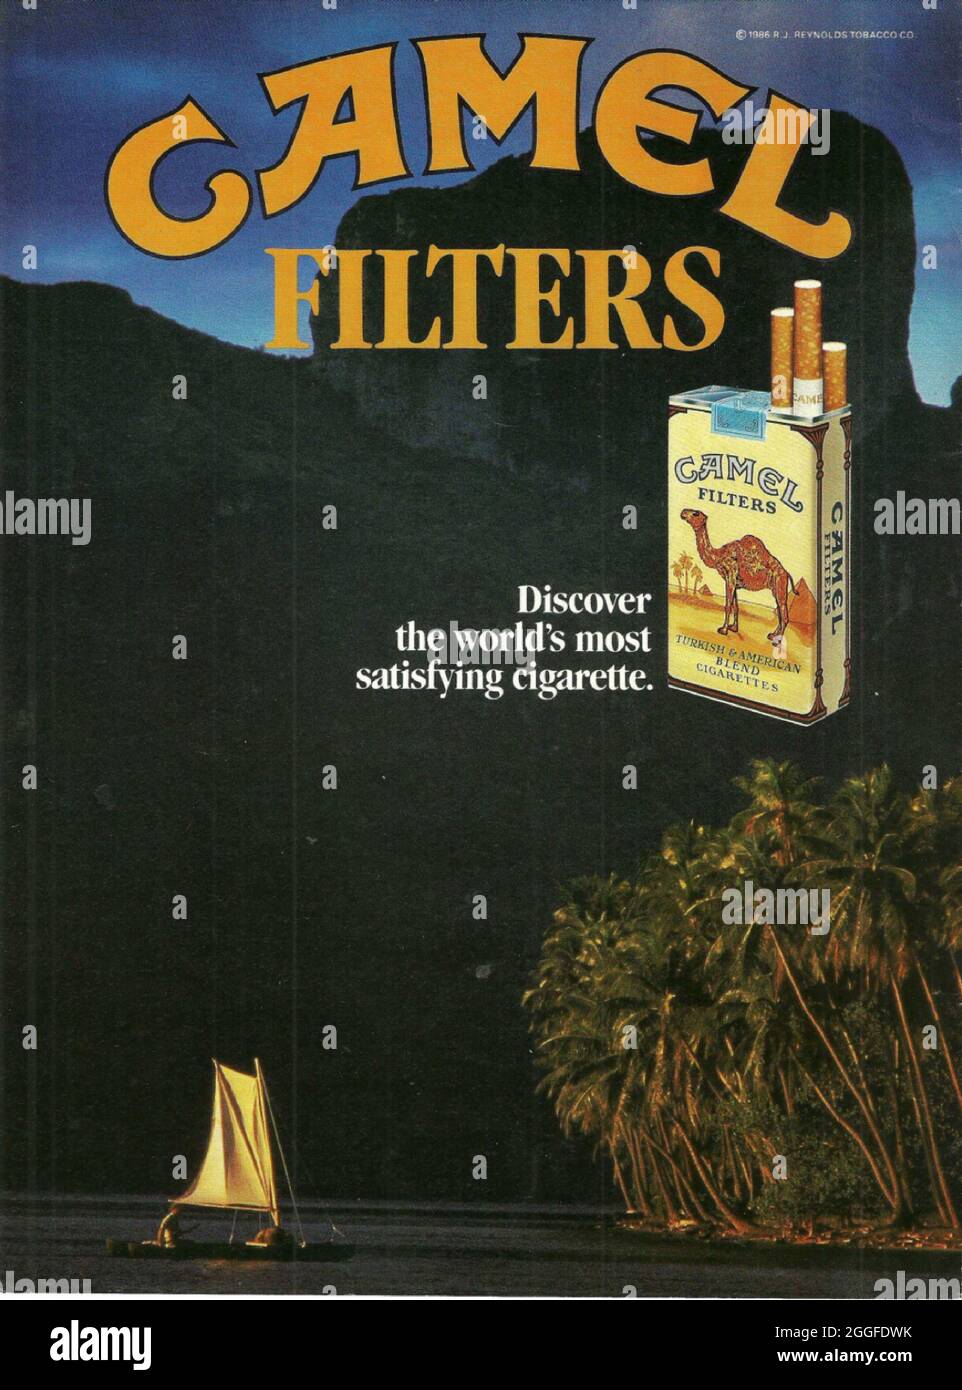 Camel cigarettes Camel filters paper advert ad advertisement 1970s 1980s american cigarettes Stock Photo